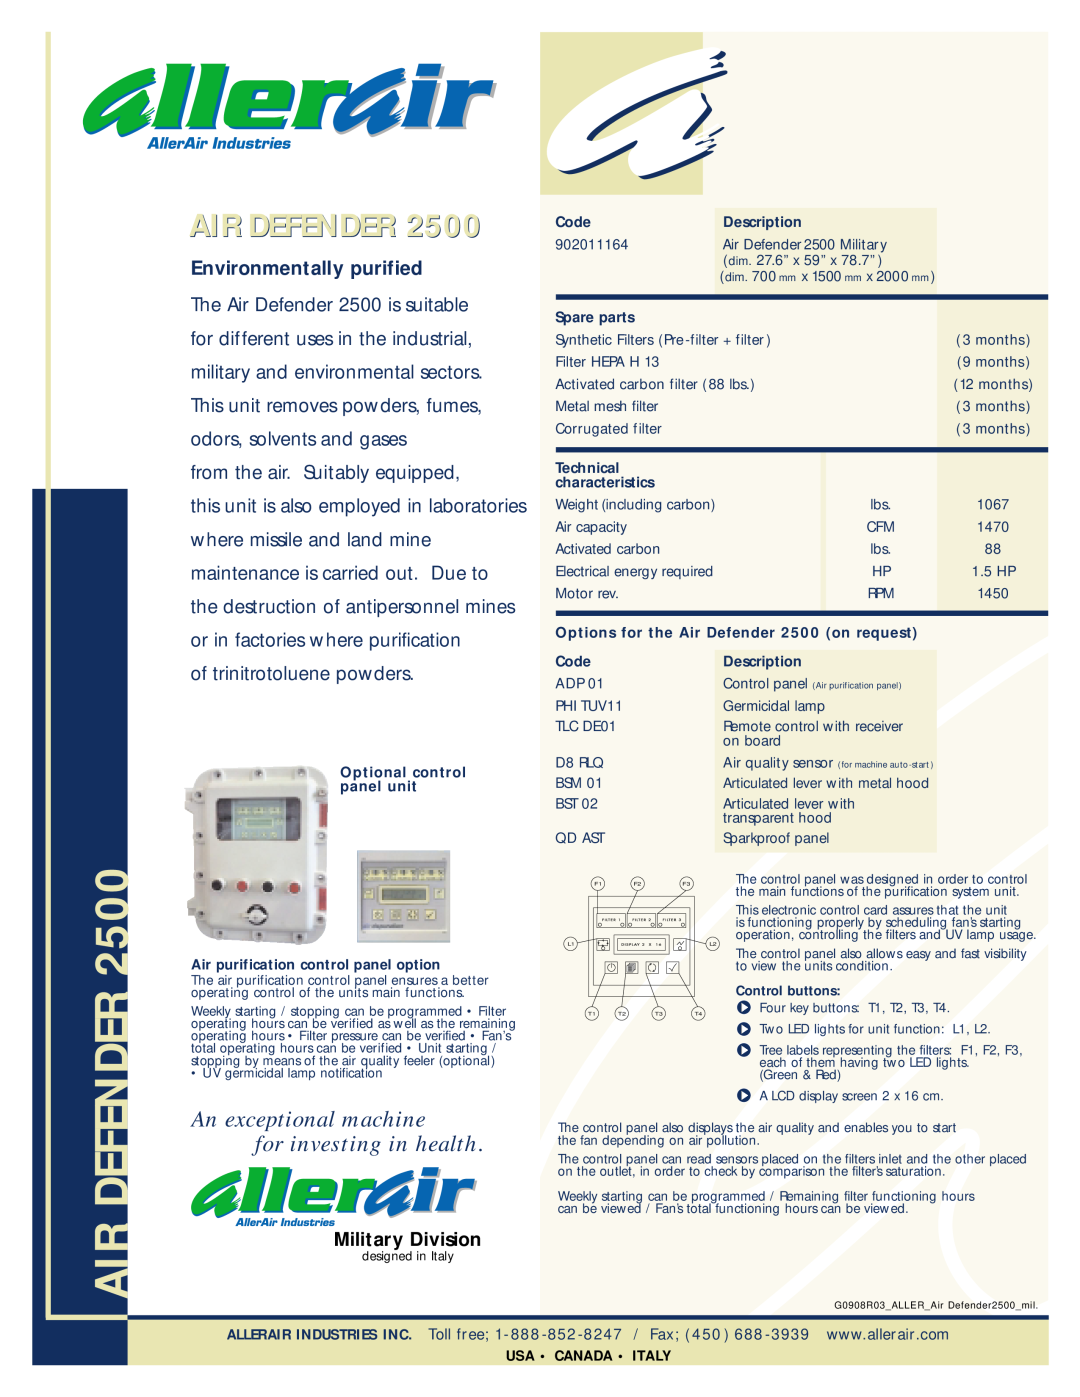 AllerAir 2500 manual Air Defender, An exceptional machine for investing in health, Environmentally purified 